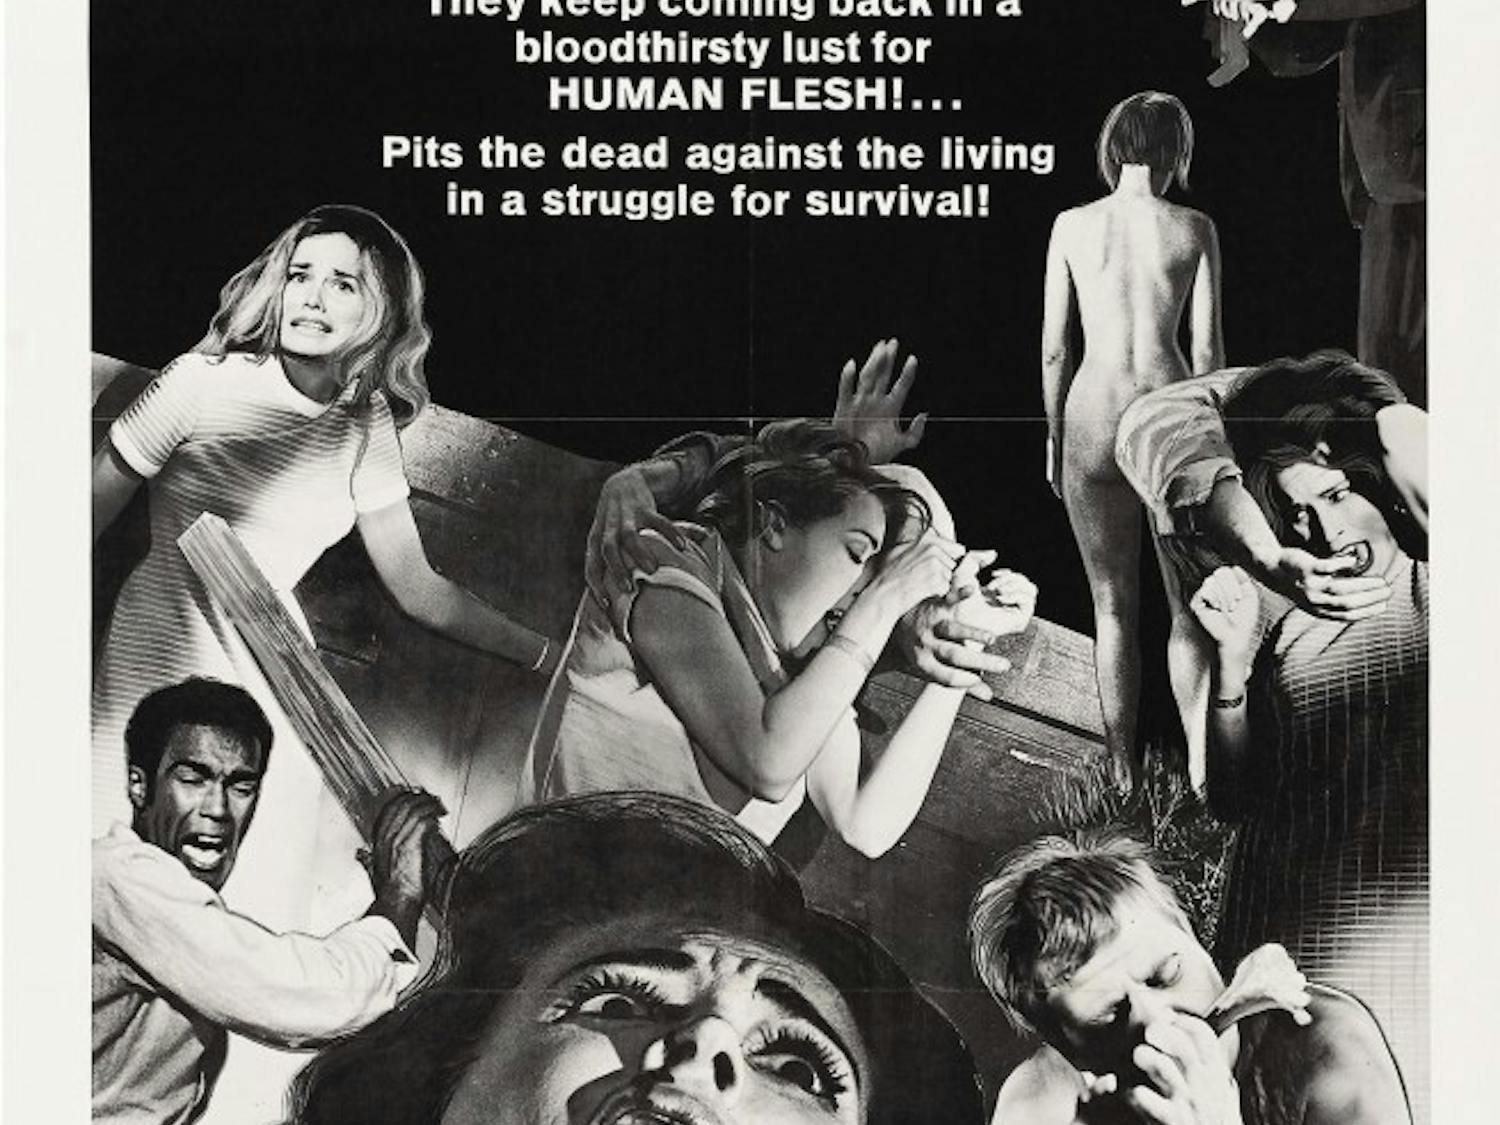 Night_of_the_Living_Dead_(1968)_theatrical_poster.jpg